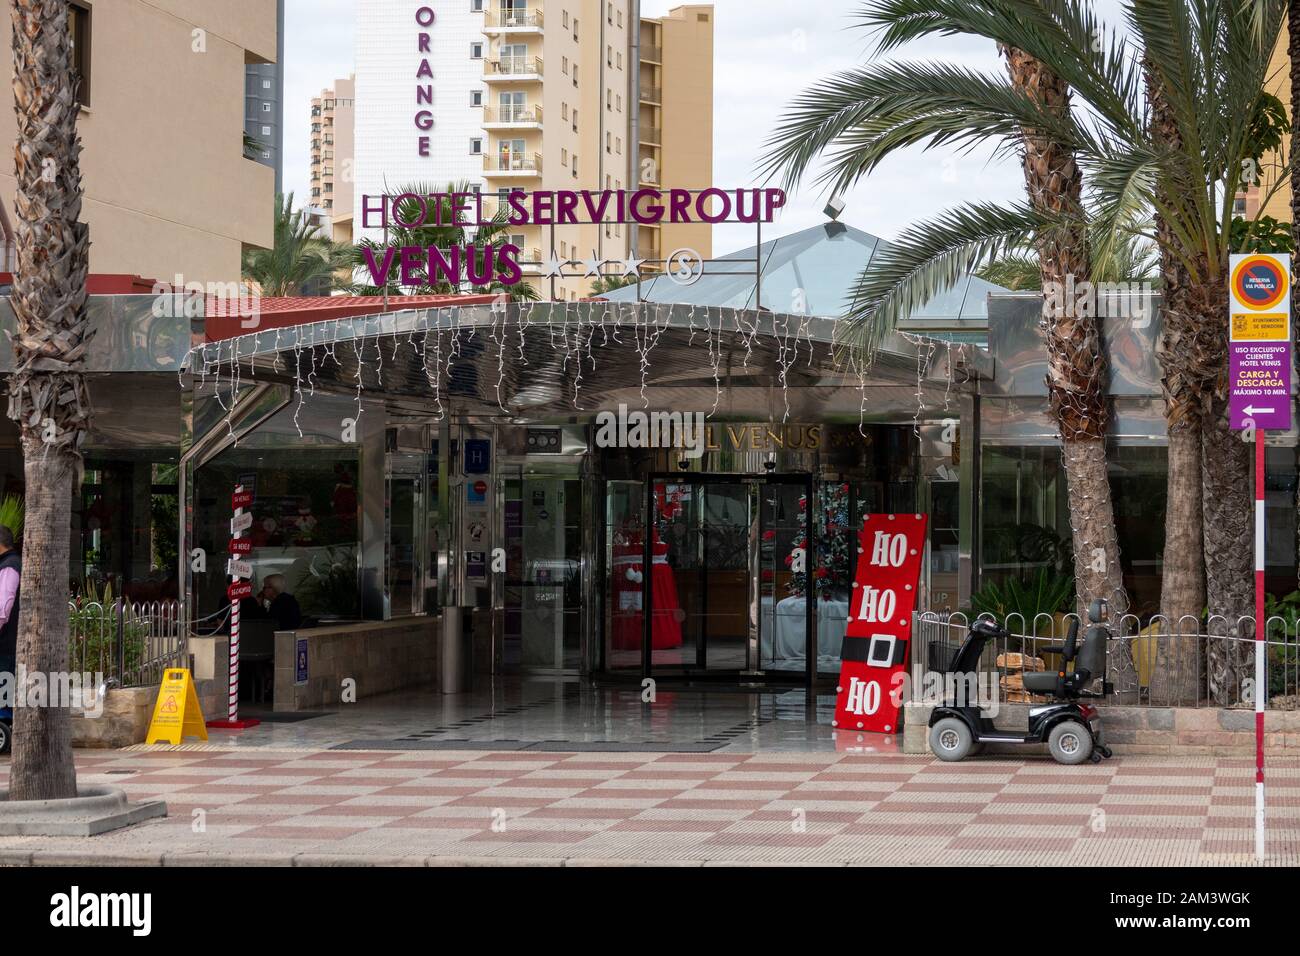 Benidorm New Town, Alicante Province, Spain, Hotel Servigroup Venus. Dressed up for Christmas, outside view. Hotel Orange in background. Stock Photo